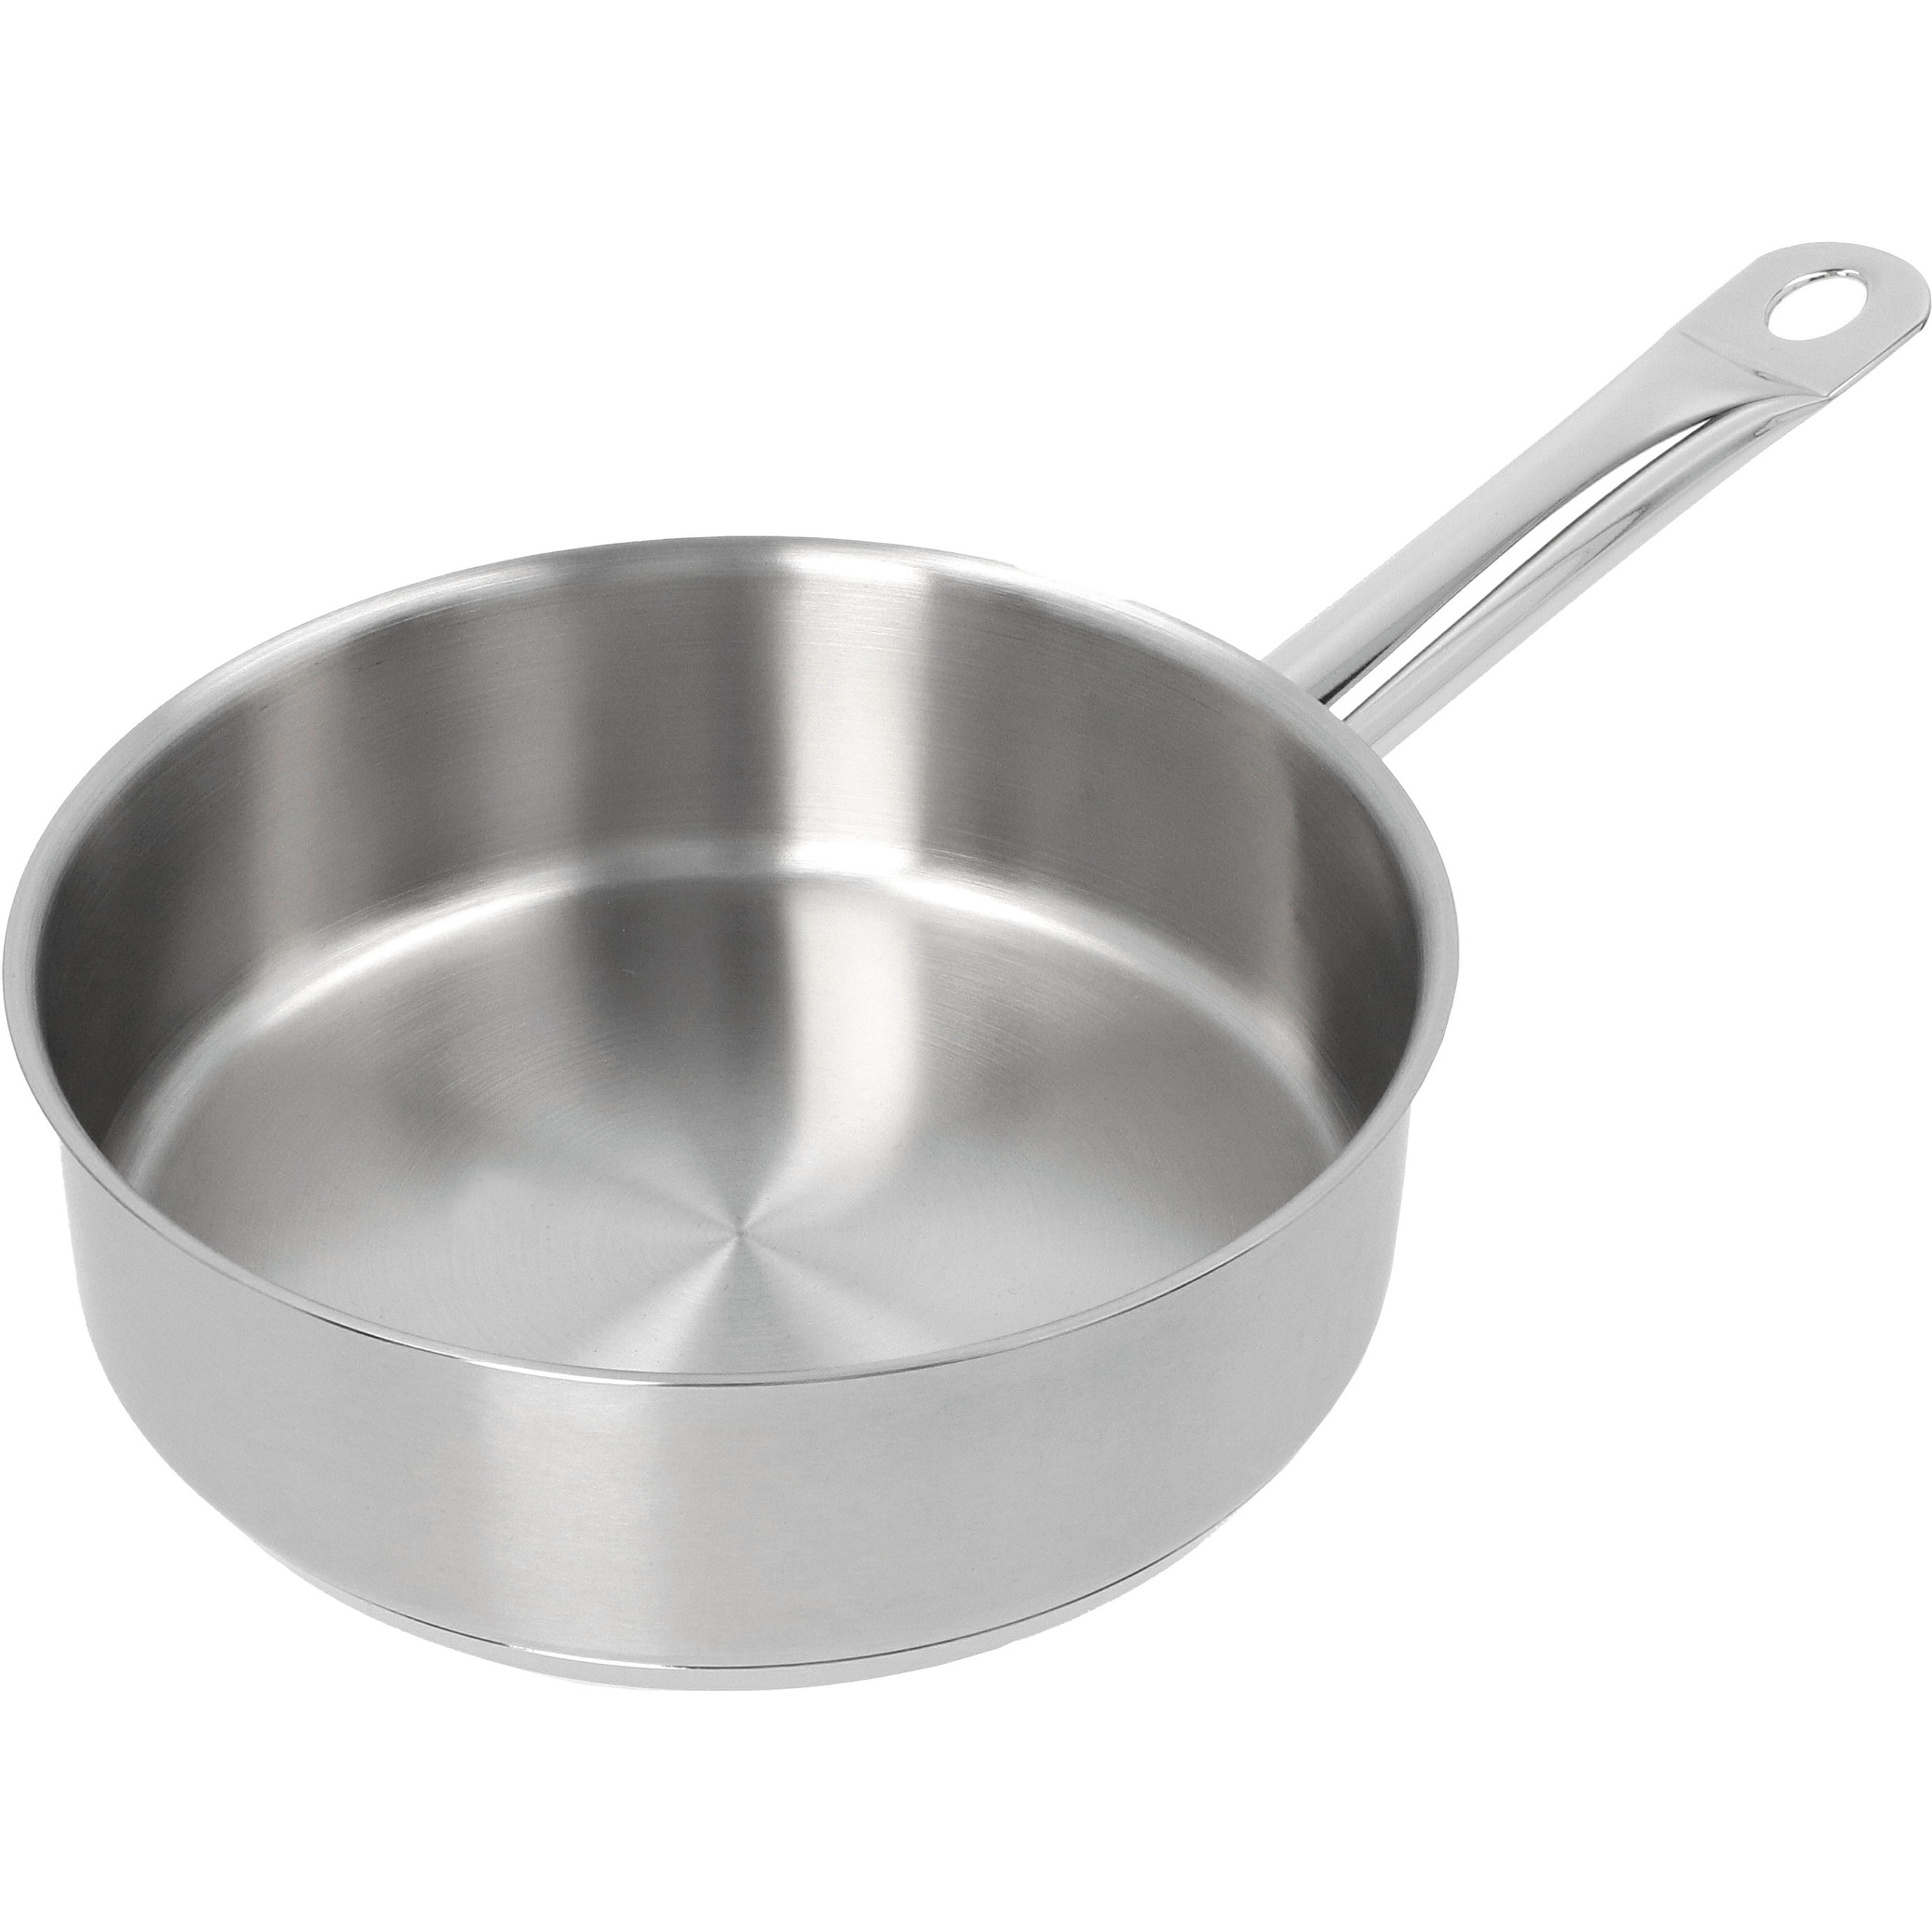 https://ak1.ostkcdn.com/images/products/is/images/direct/a9f1eb4928bc5b0e62dc30b9509bfd0c767c7861/Demeyere-Resto-4-cup-Stainless-Steel-Egg-Poacher-Set.jpg